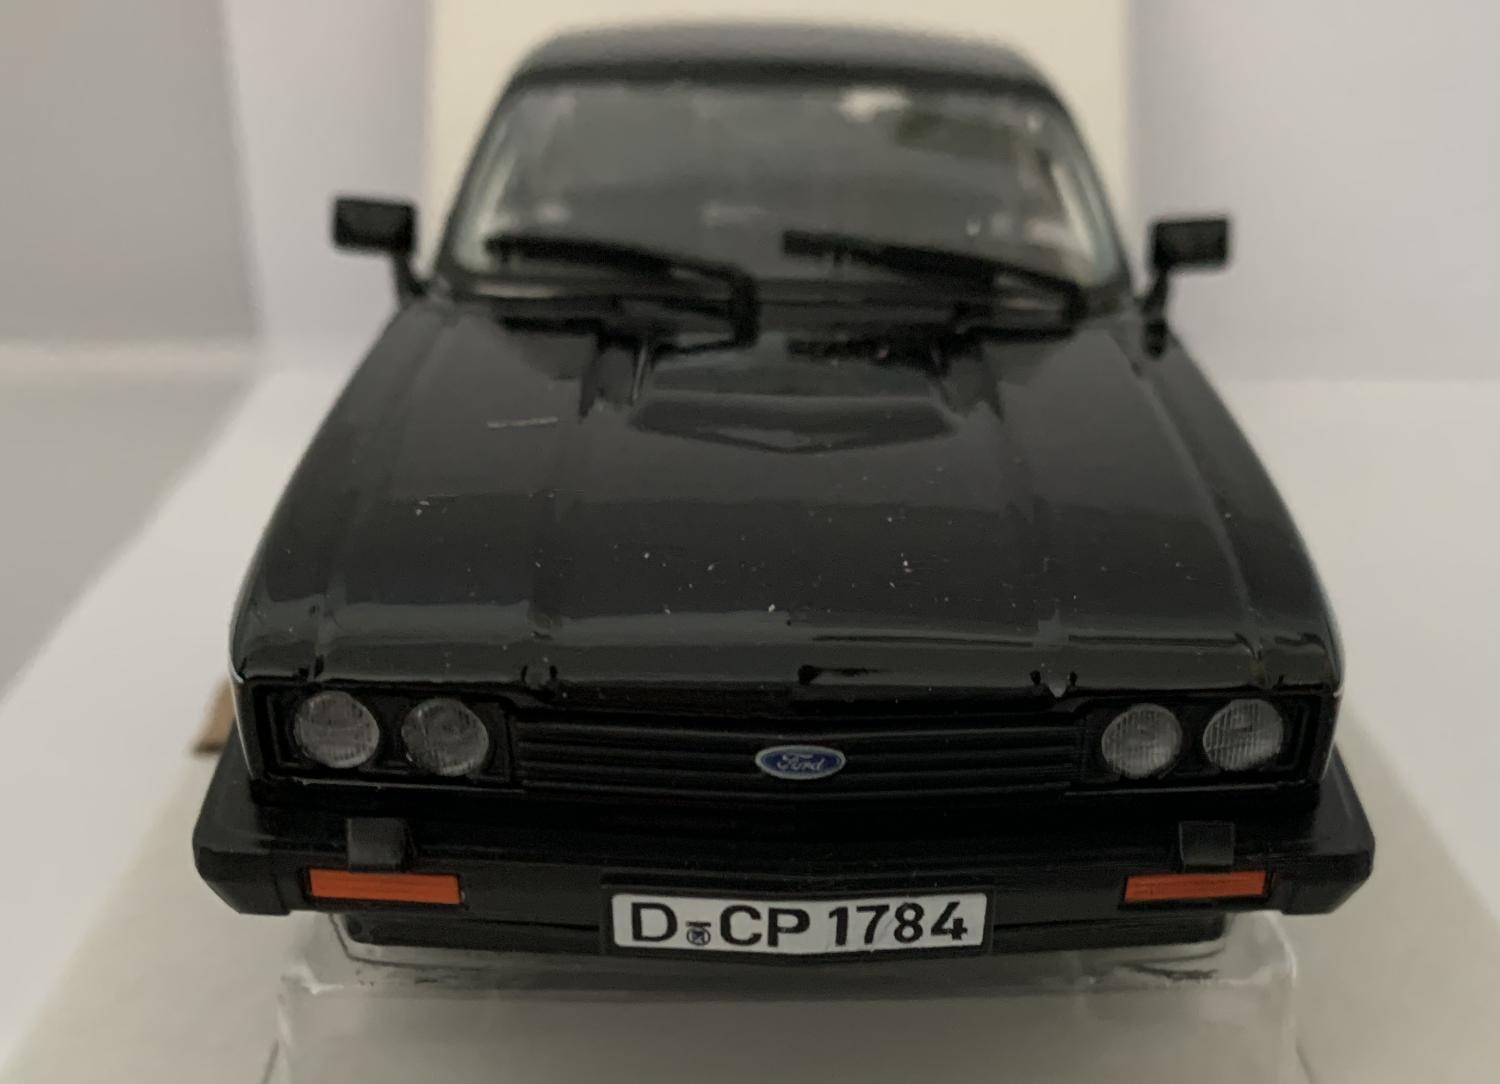 An excellent scale model of a Ford Capri 2.8 Injection decorated in black with authentic graphics, rear spoiler and silver wheels